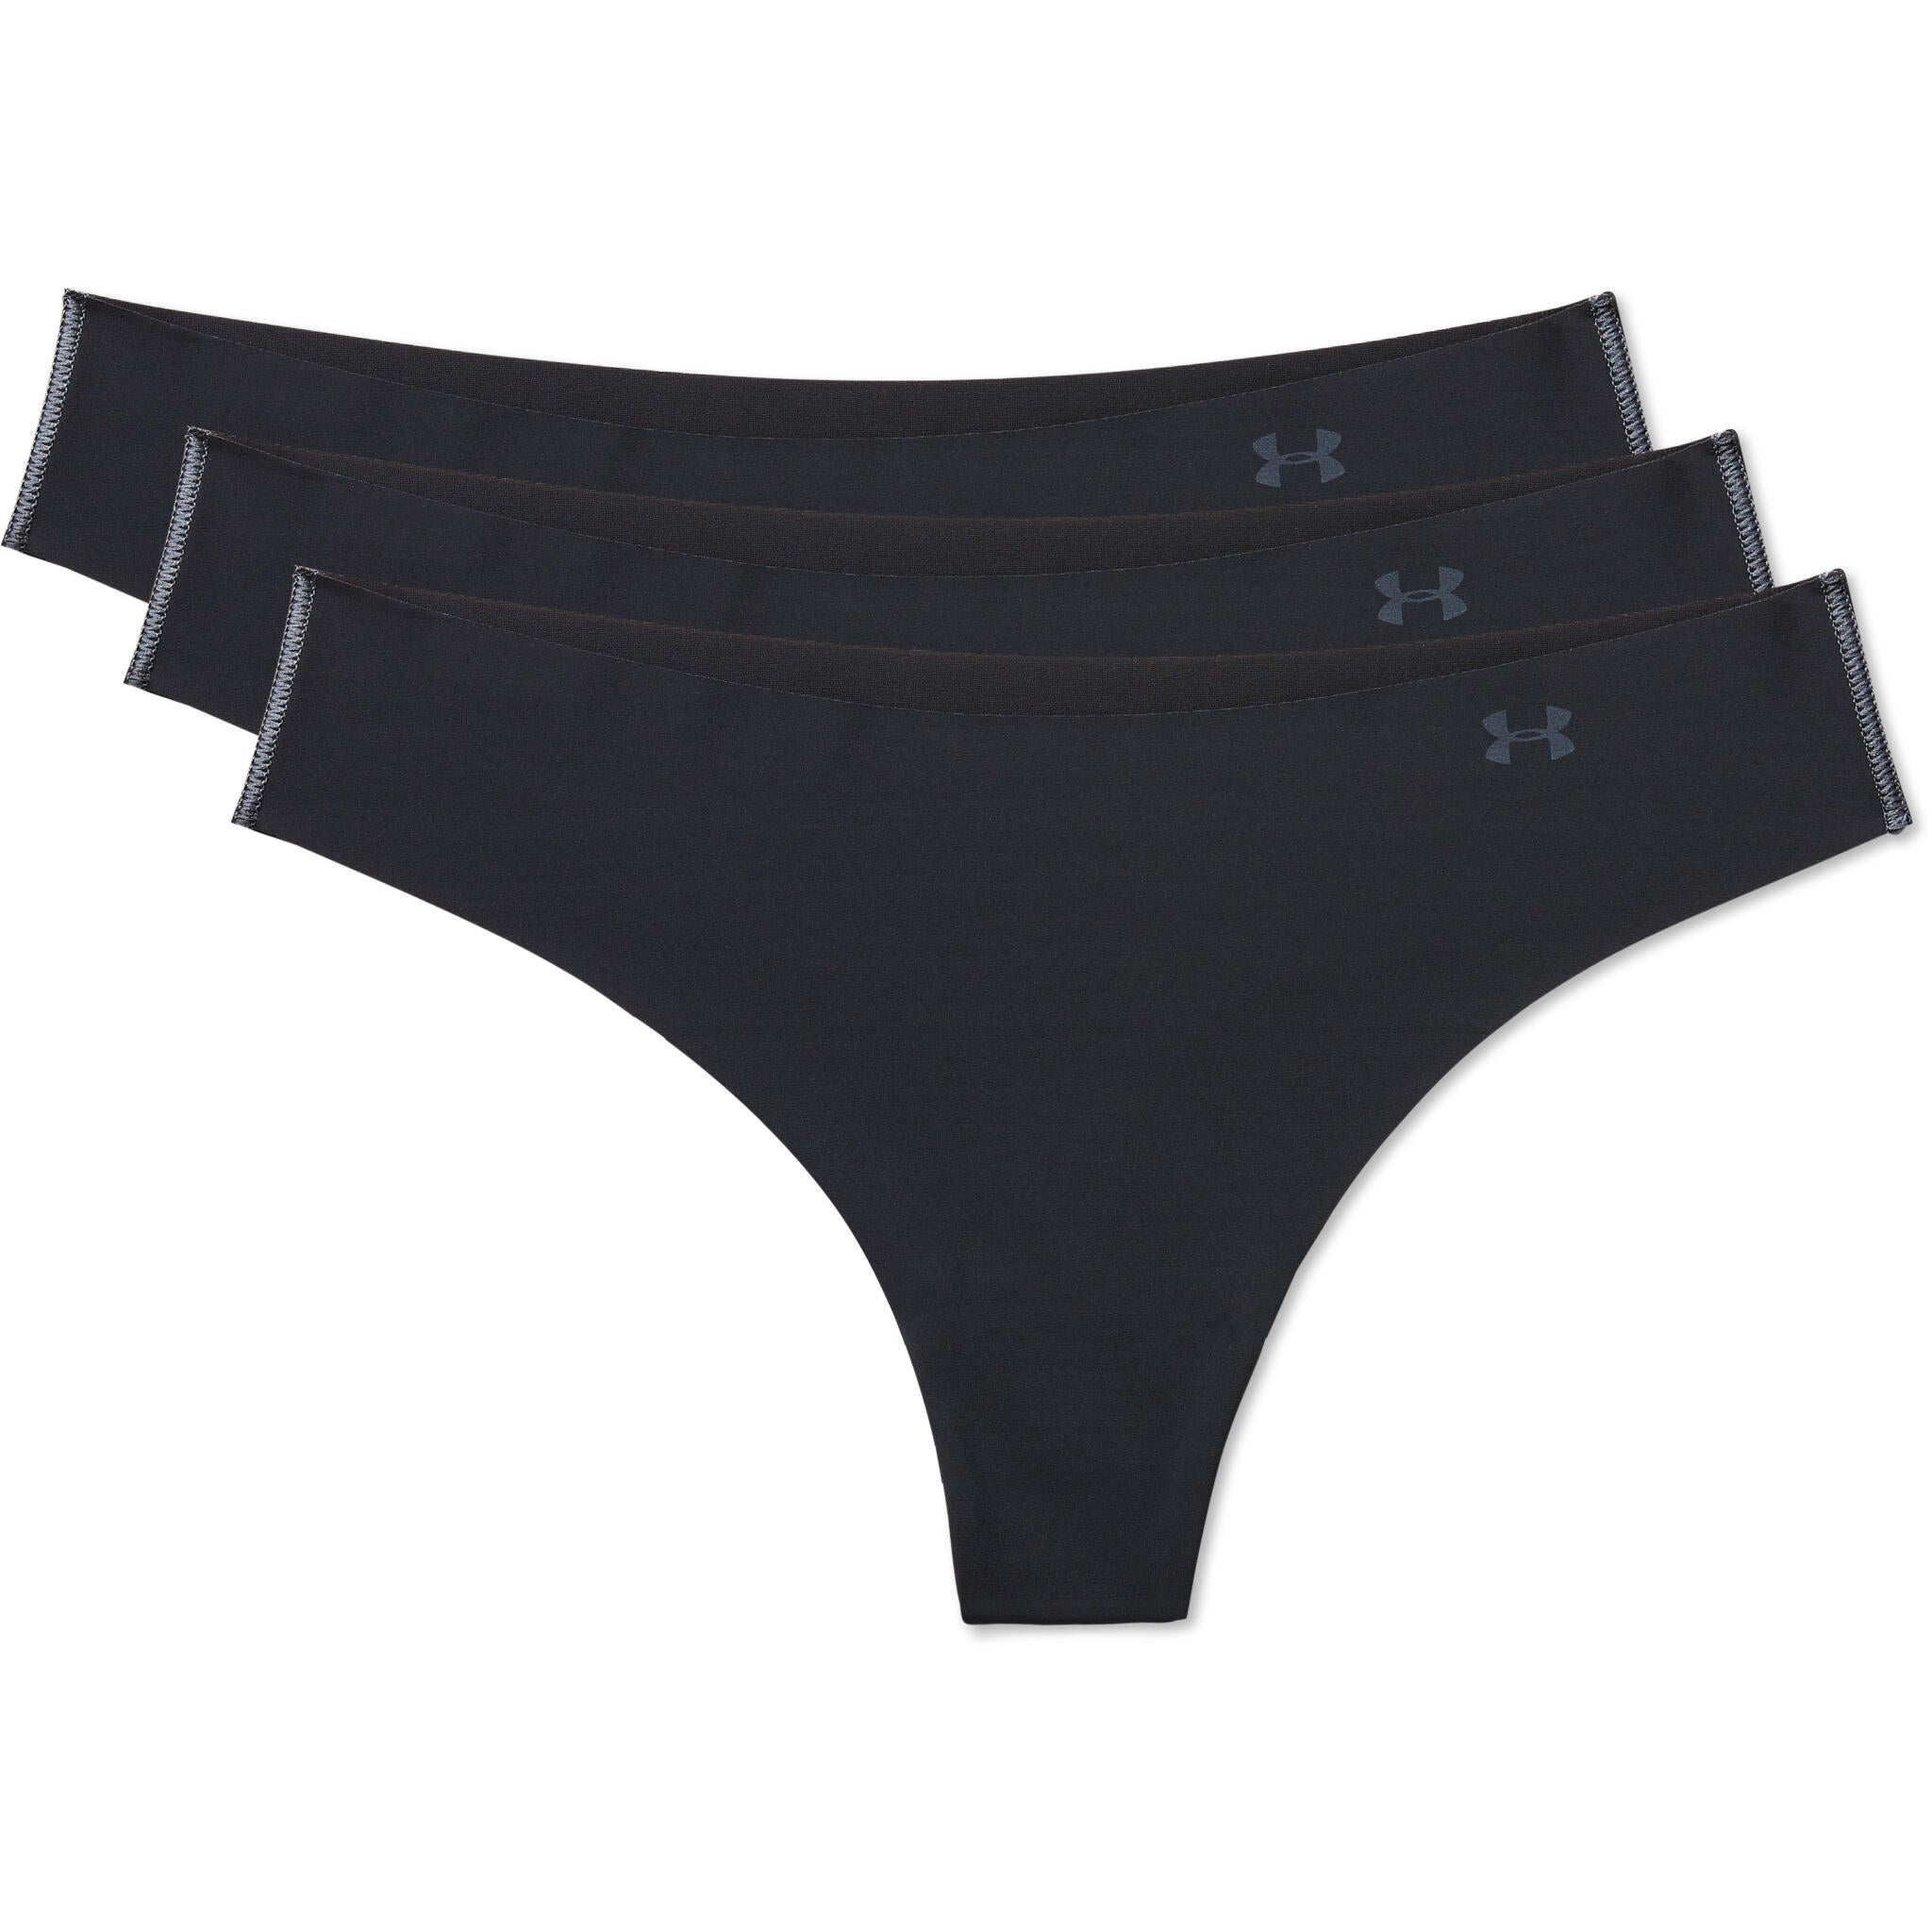 Under Armour UA Pure Stretch 3-PK THONG Underwear 1355623-001 (Size LG)  MSRP $25 